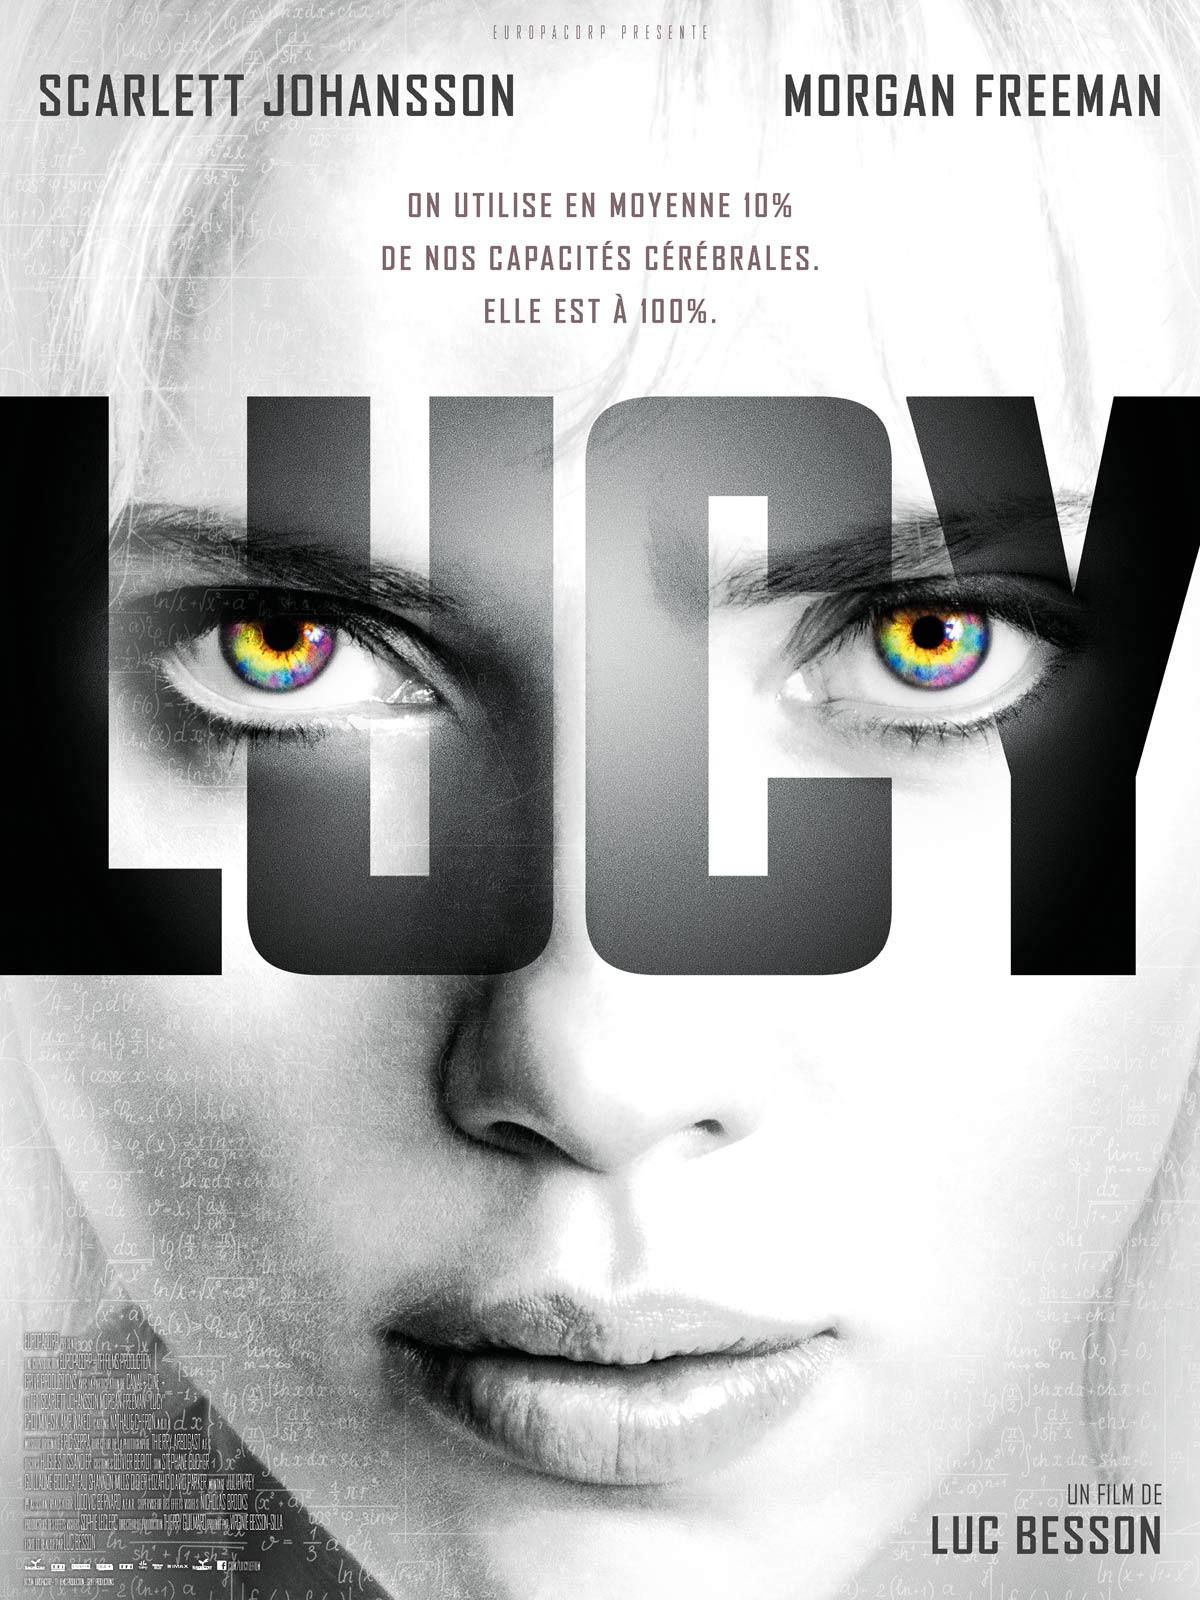 Lucy - 